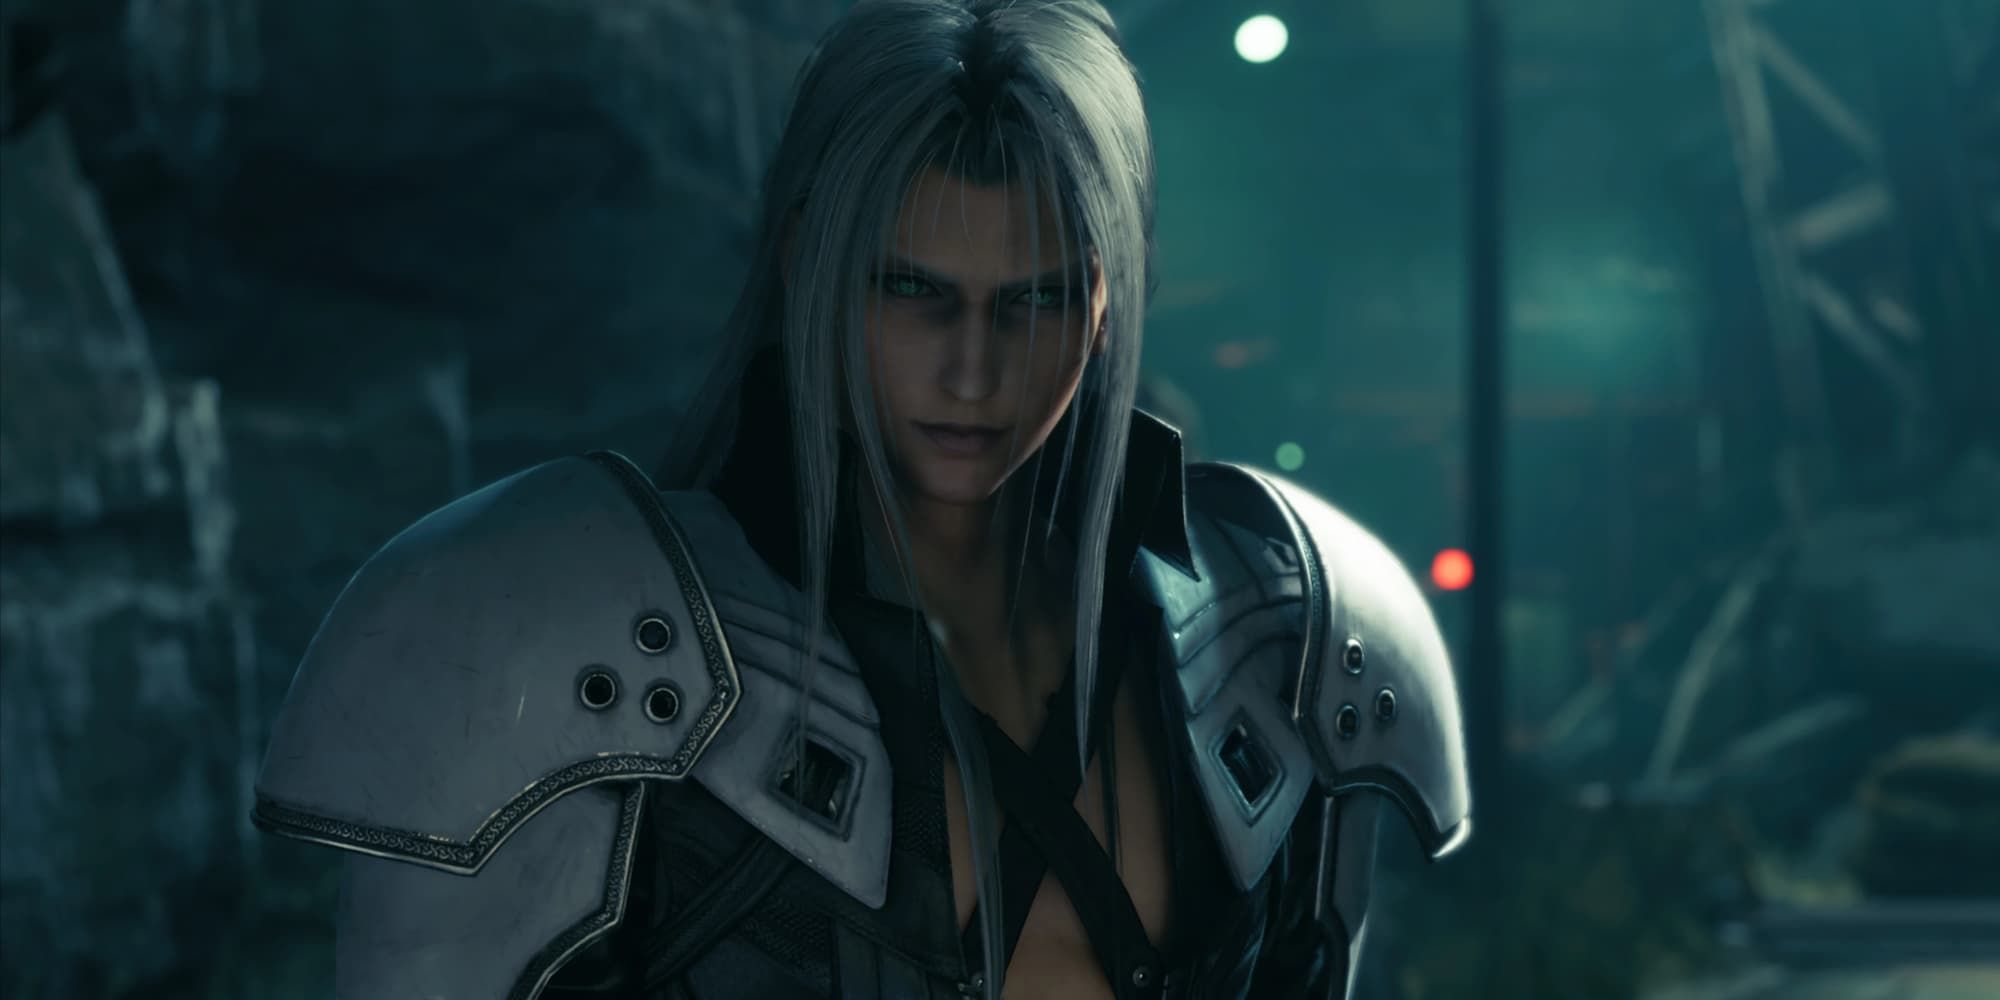 Sephiroth standing amidst the ruins after the plate collapse